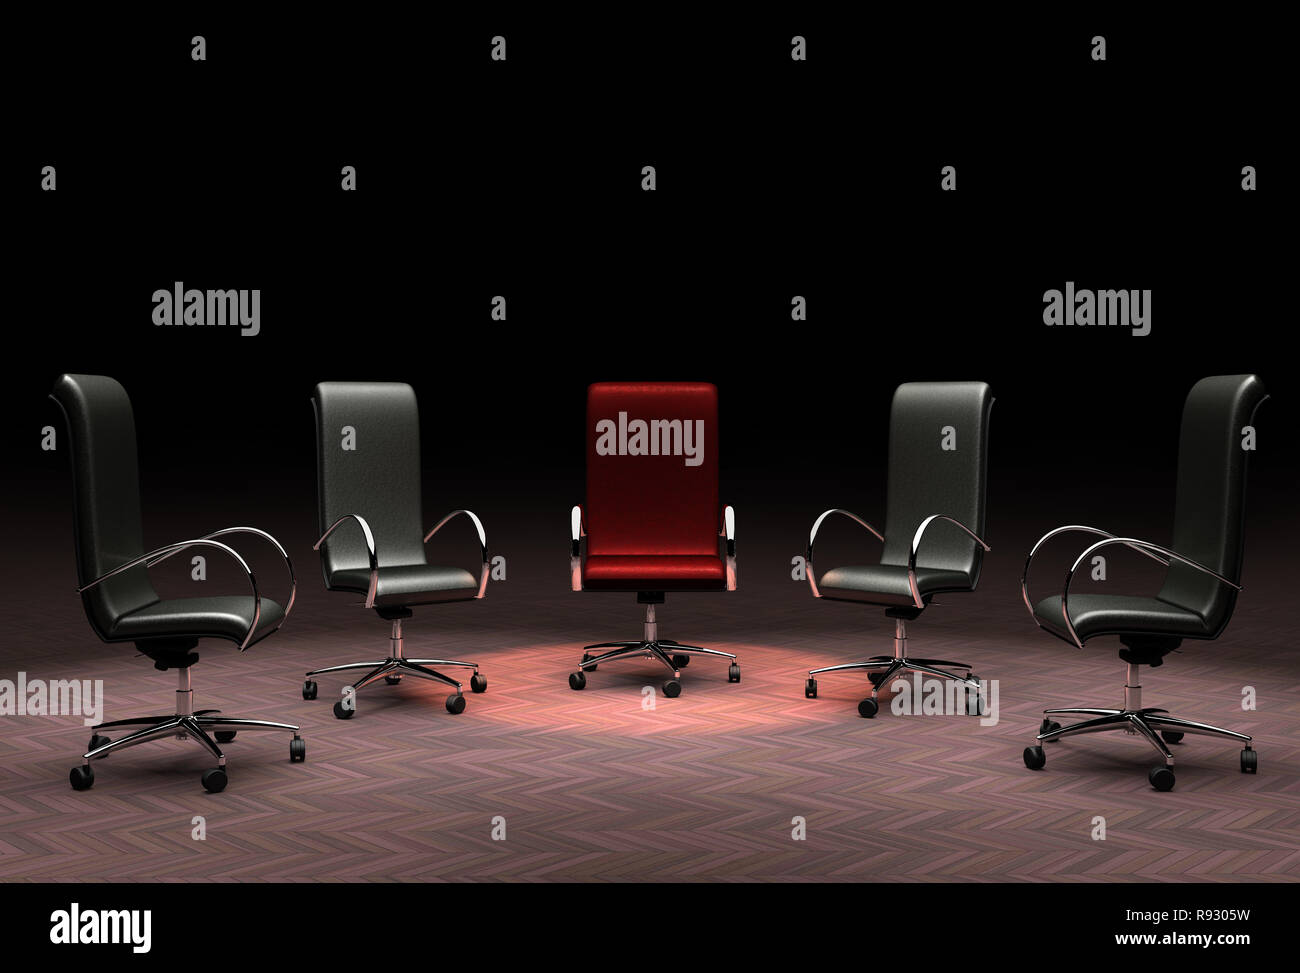 3D rendering of a group of office chairs representing the concepts of leadership, stand out from the crowd, different. Stock Photo